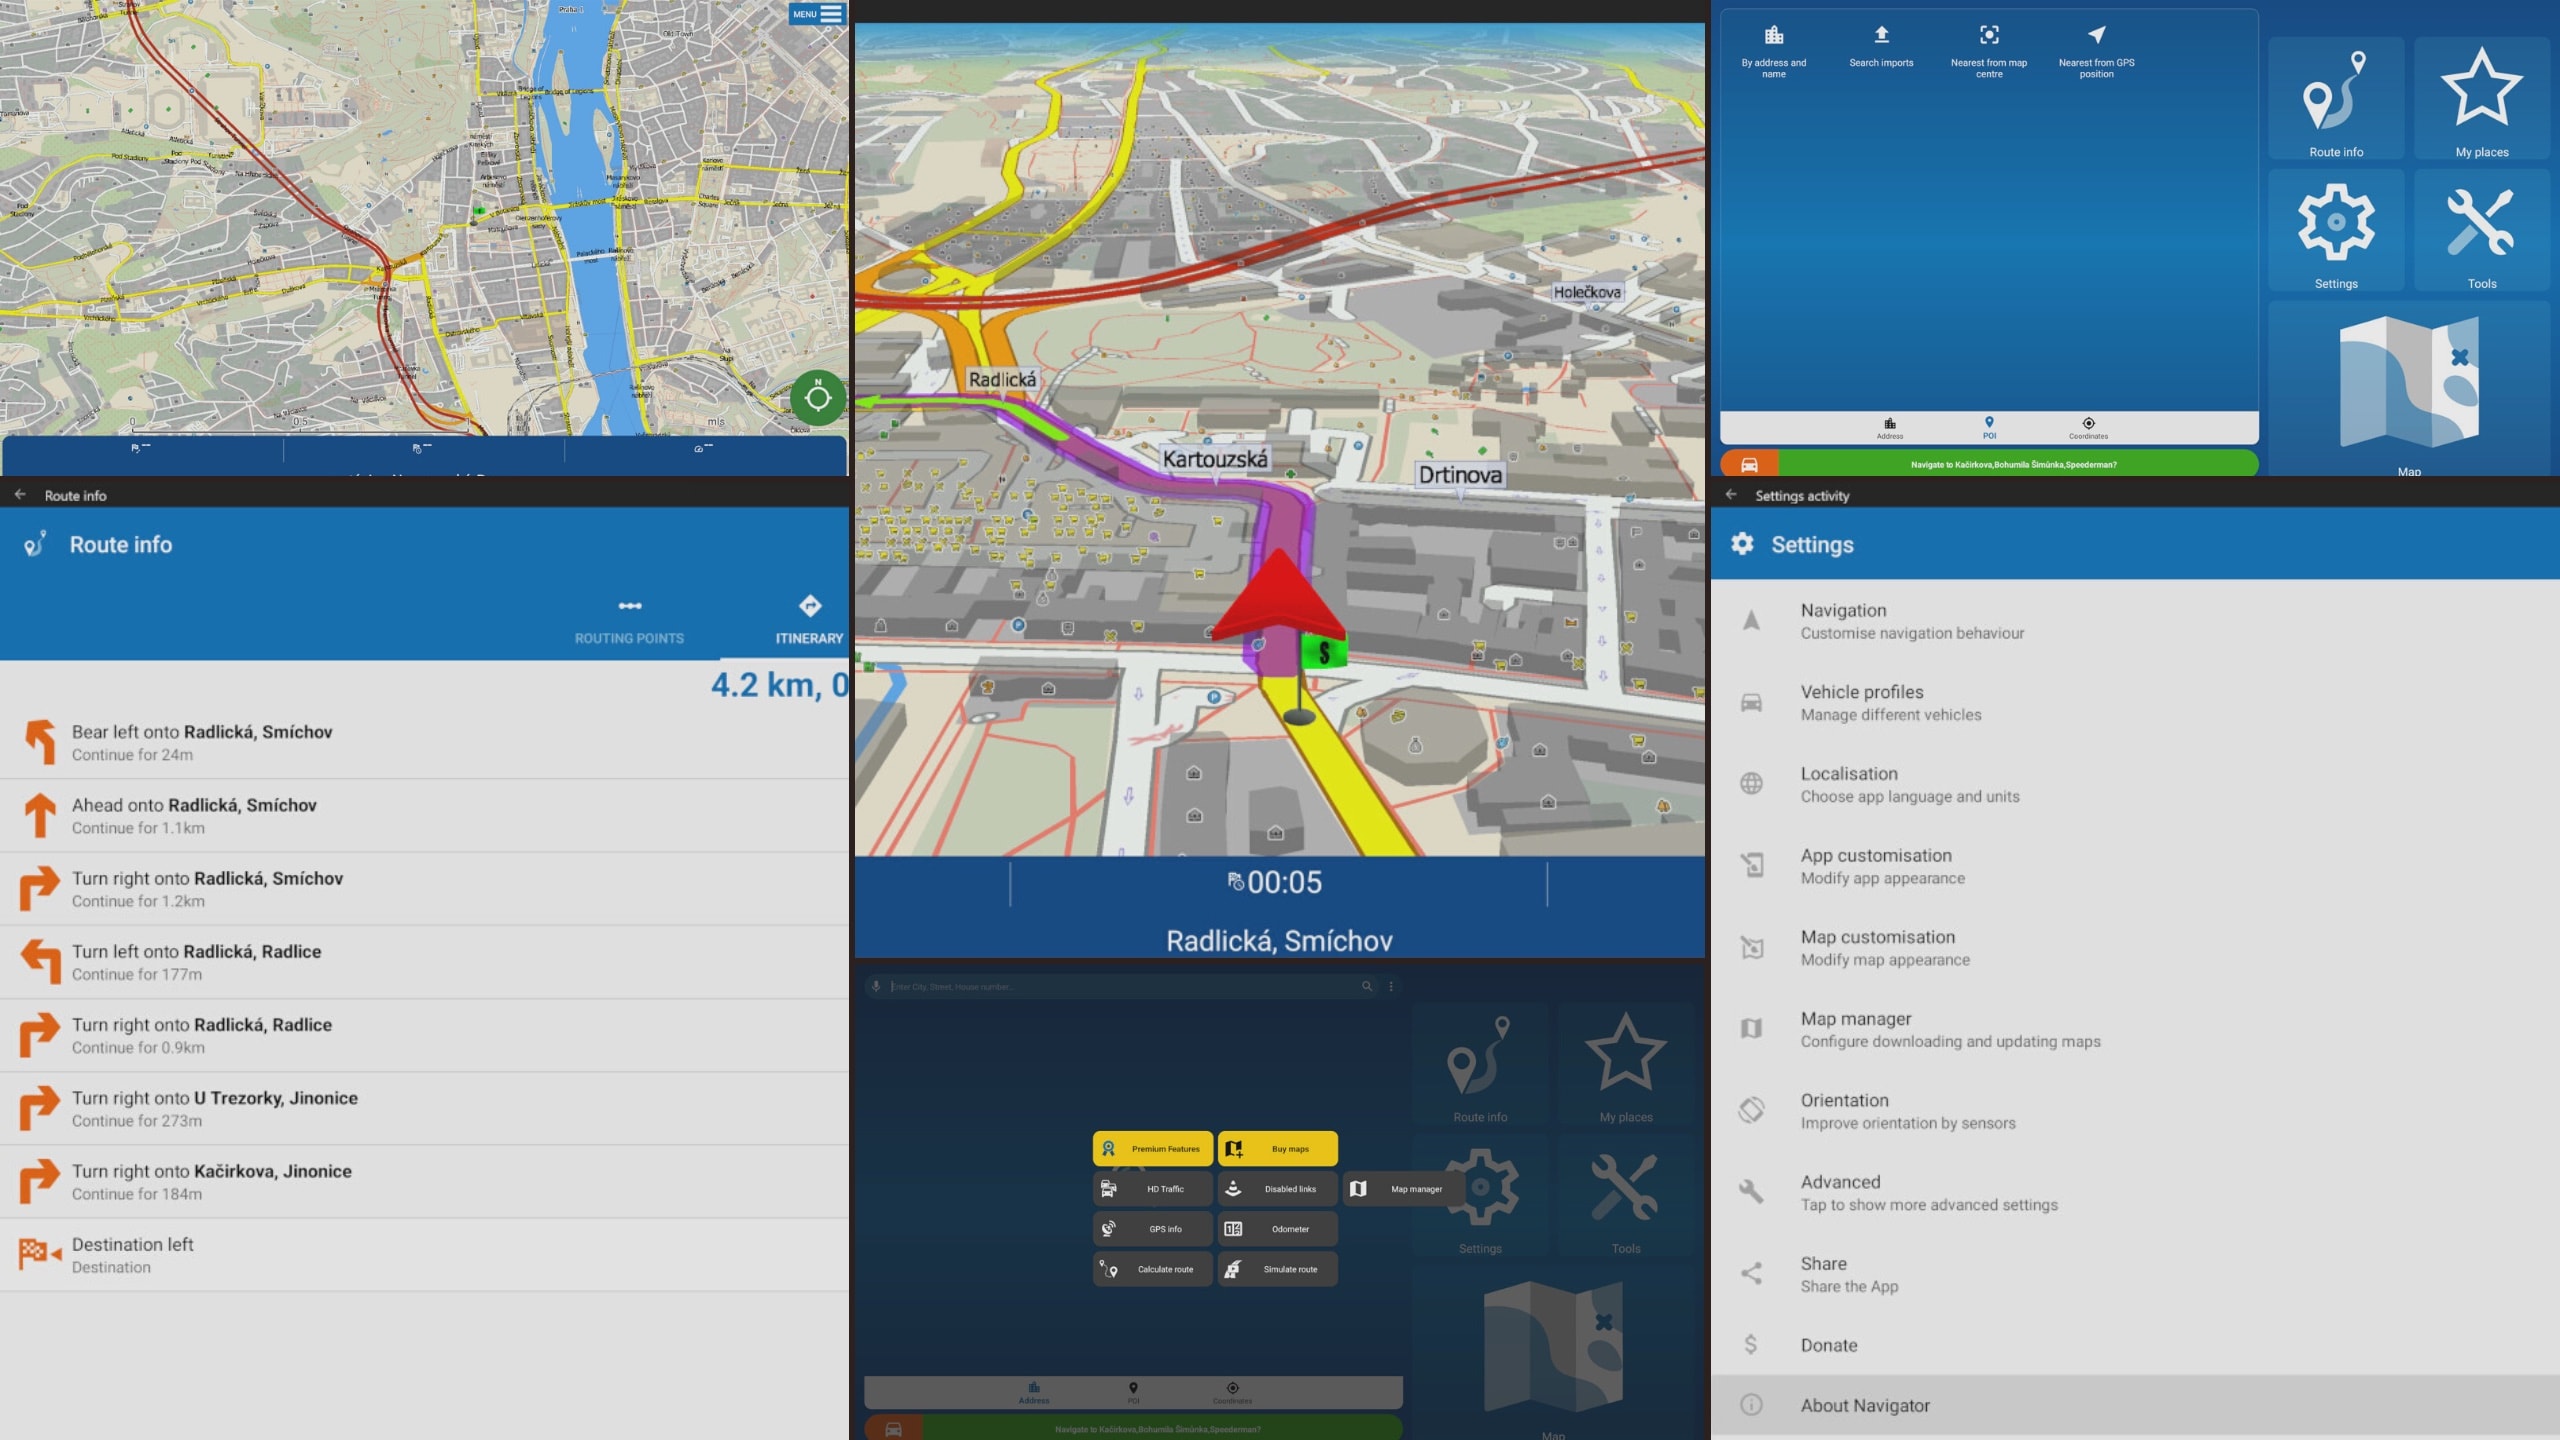 Top Google Maps Rival Brings Best Navigation Features to Windows - autoevolution